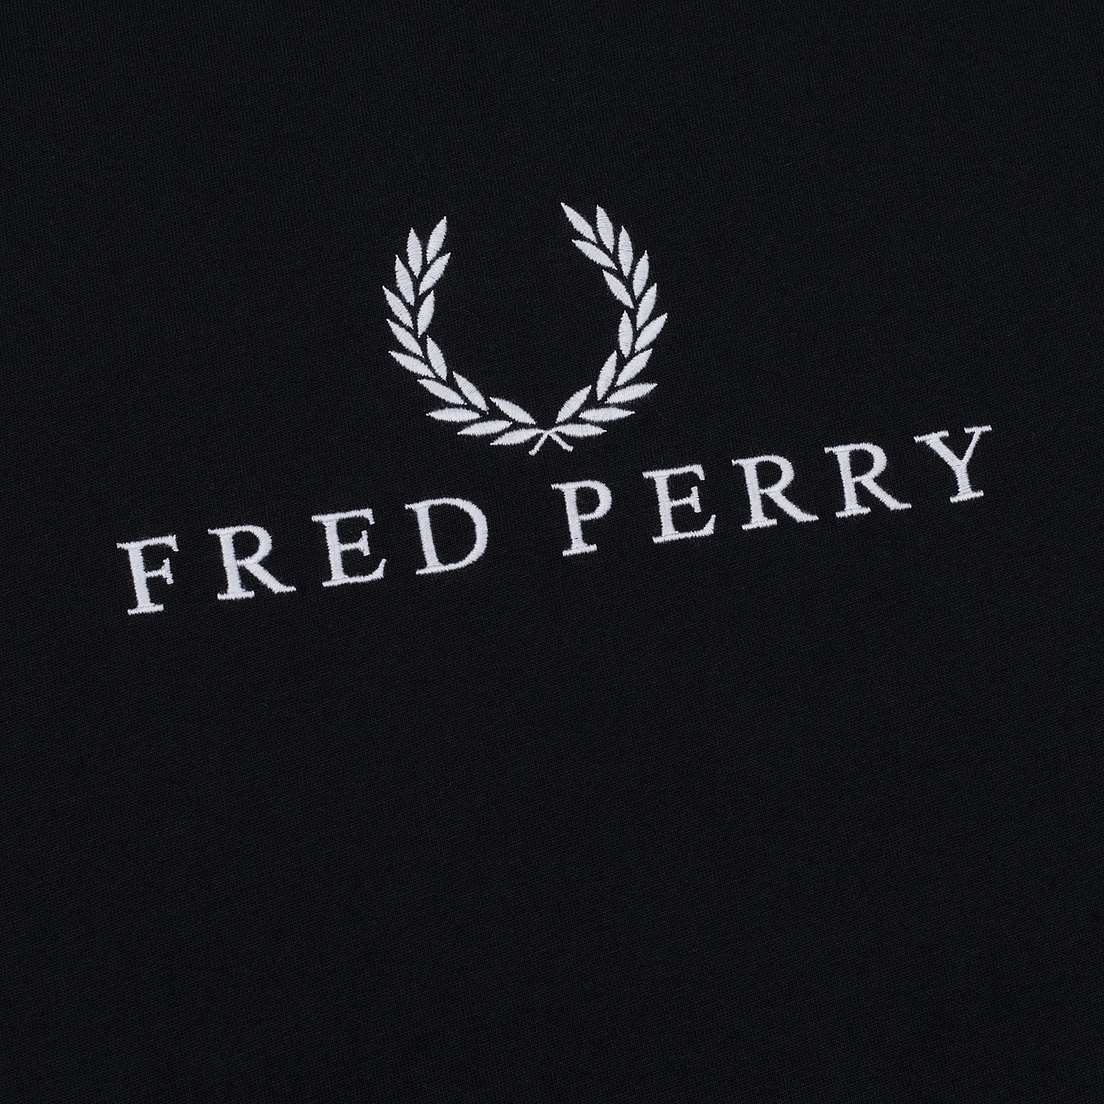 Fred Perry Женская футболка Sports Authentic Embroidered